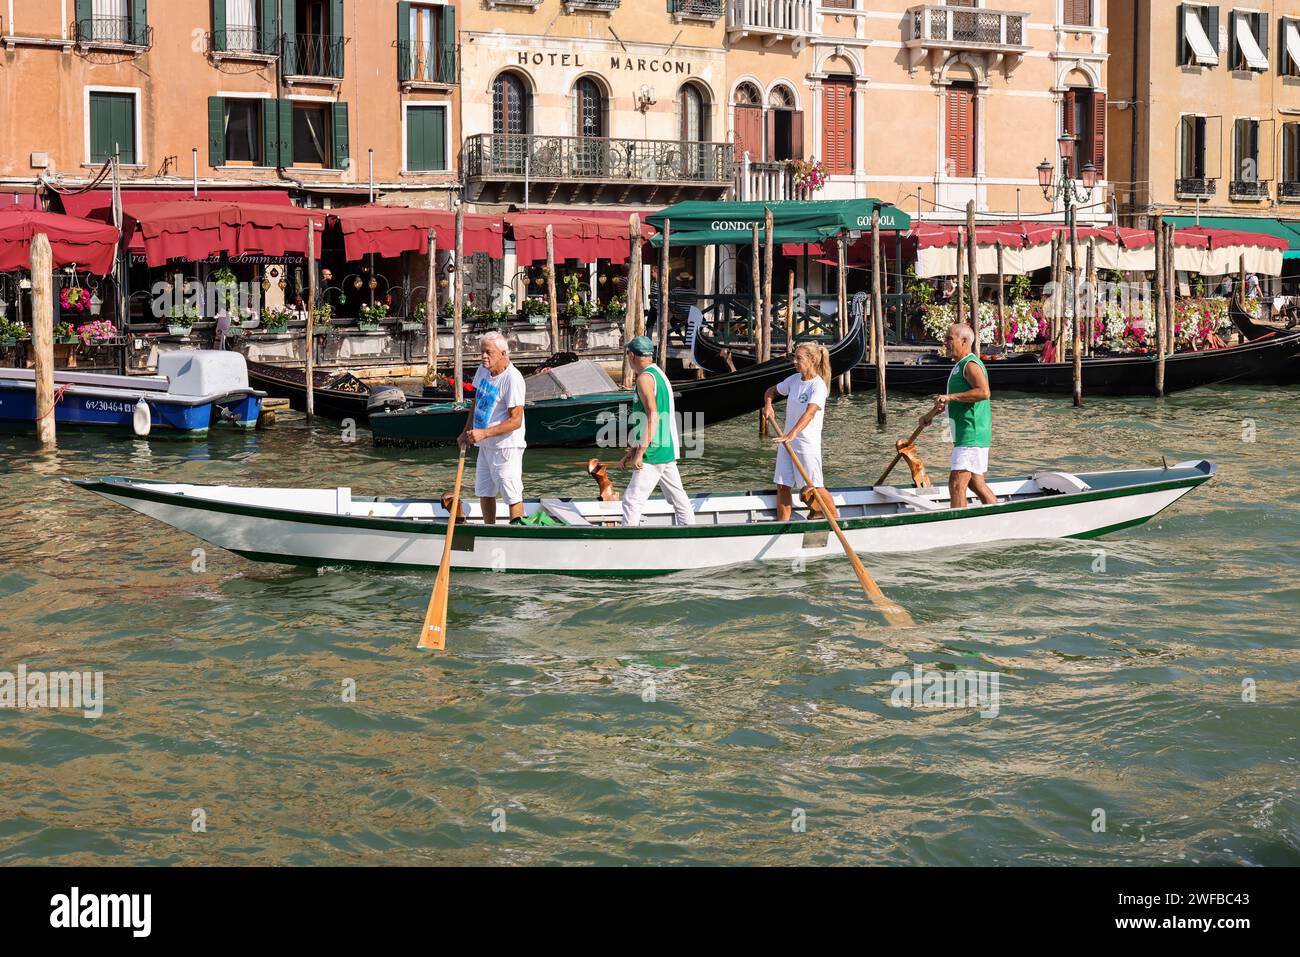 Venice, Italy - September 6, 2022: Local rowing team training on the Grand Canal in Venice, Italy Stock Photo